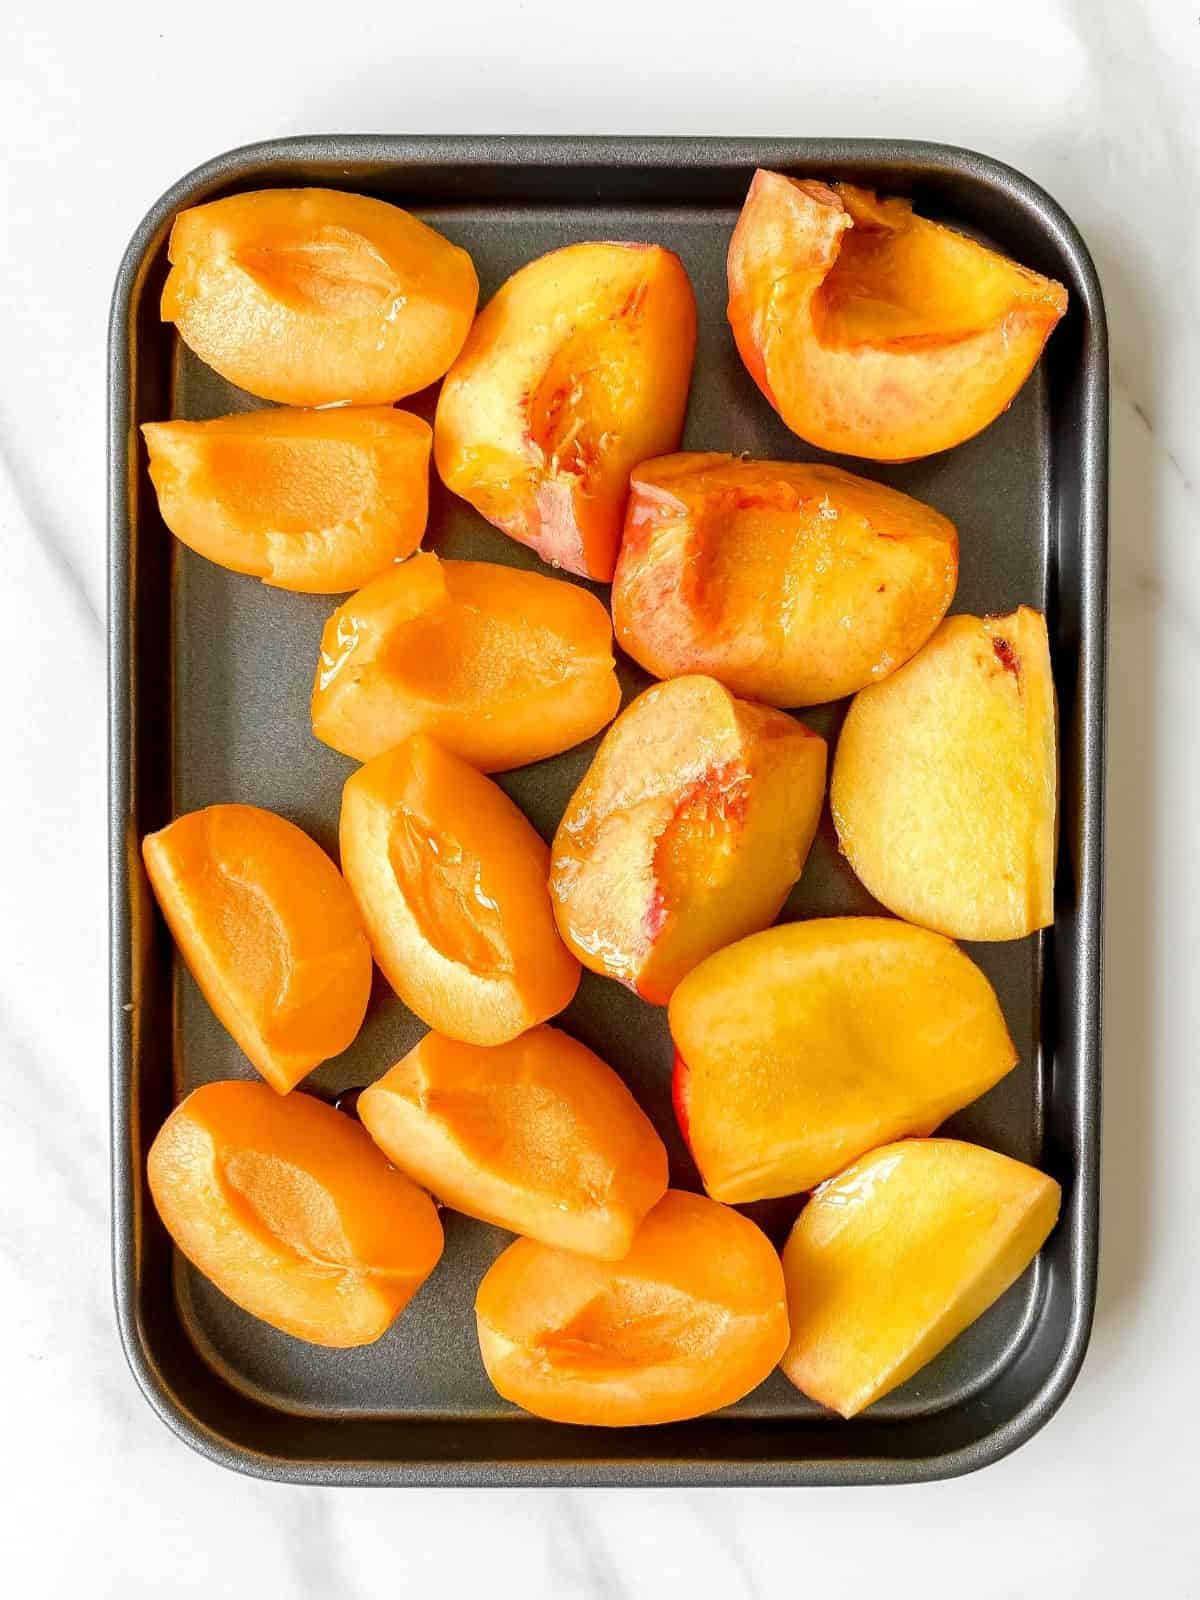 peaches and nectarines on a baking tray.